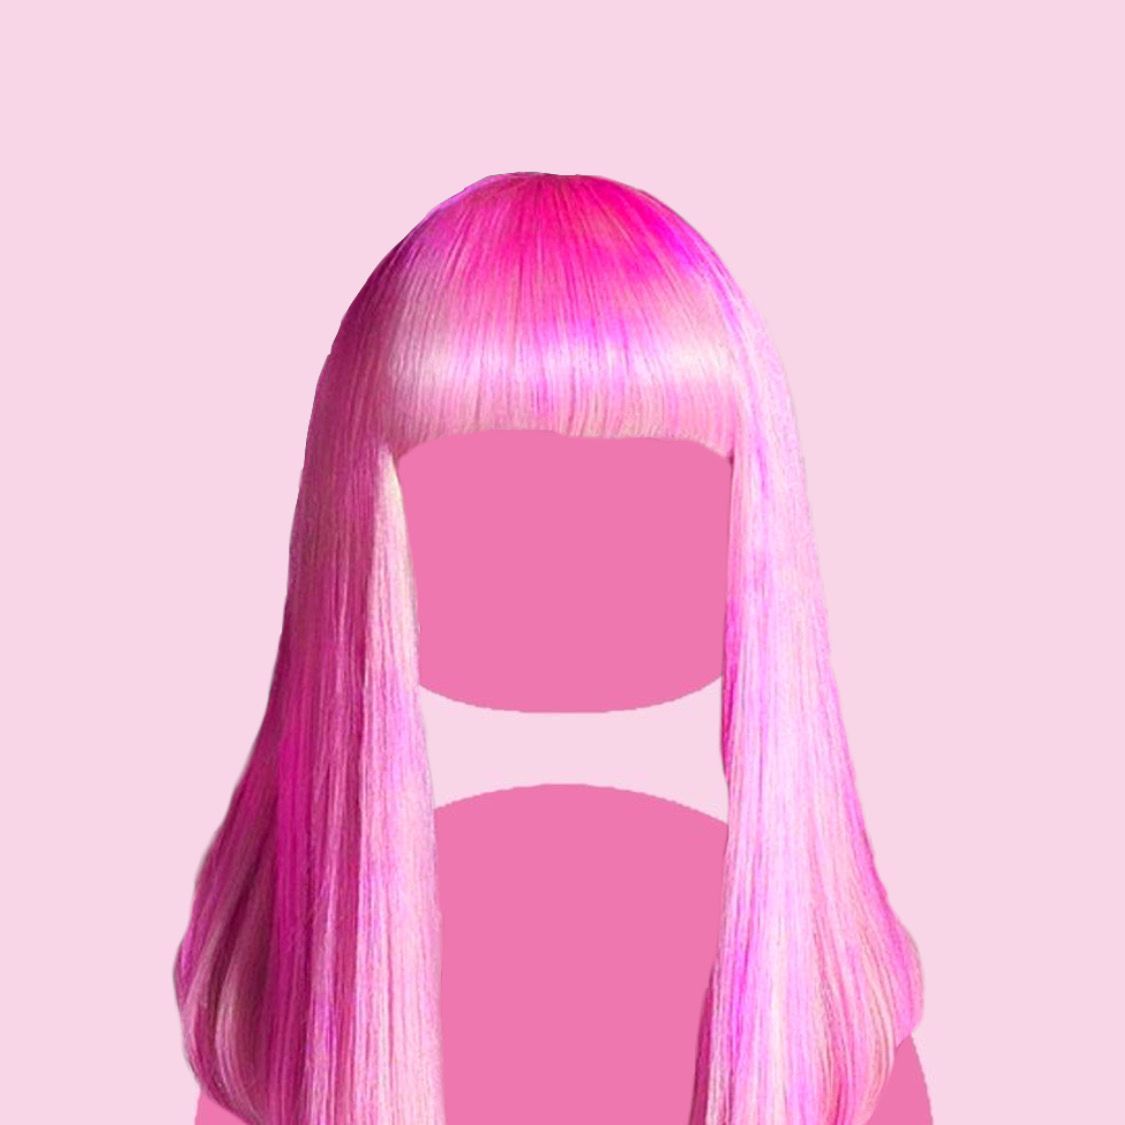 Pink wig. Pink wig, Profile picture, Wigs